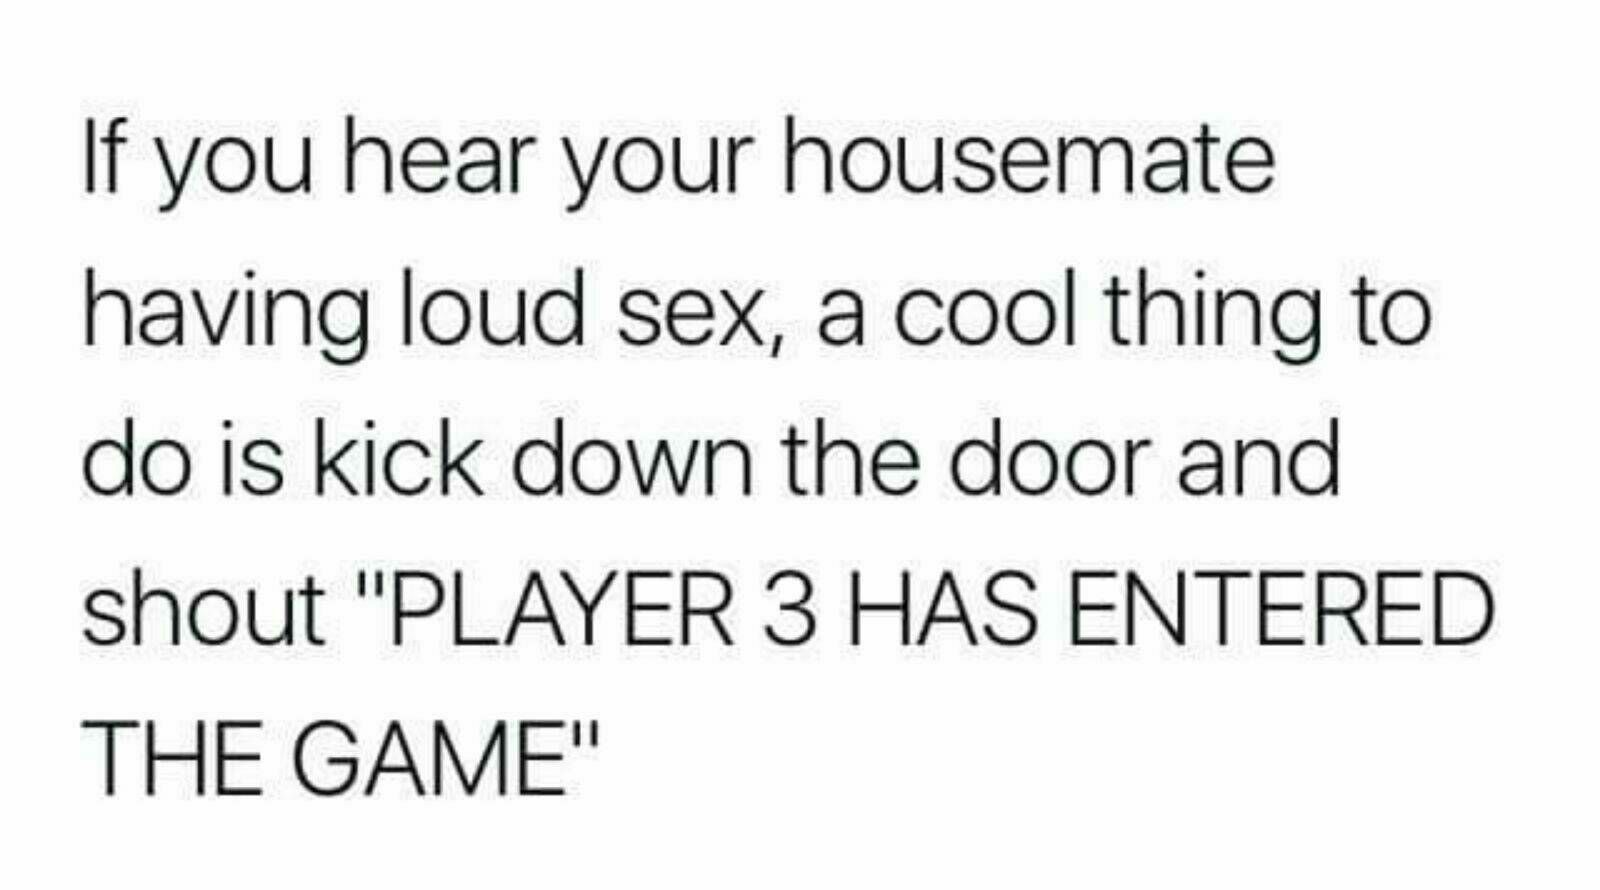 funny meme - If you hear your housemate having loud sex, a cool thing to do is kick down the door and shout "Player 3 Has Entered The Game"